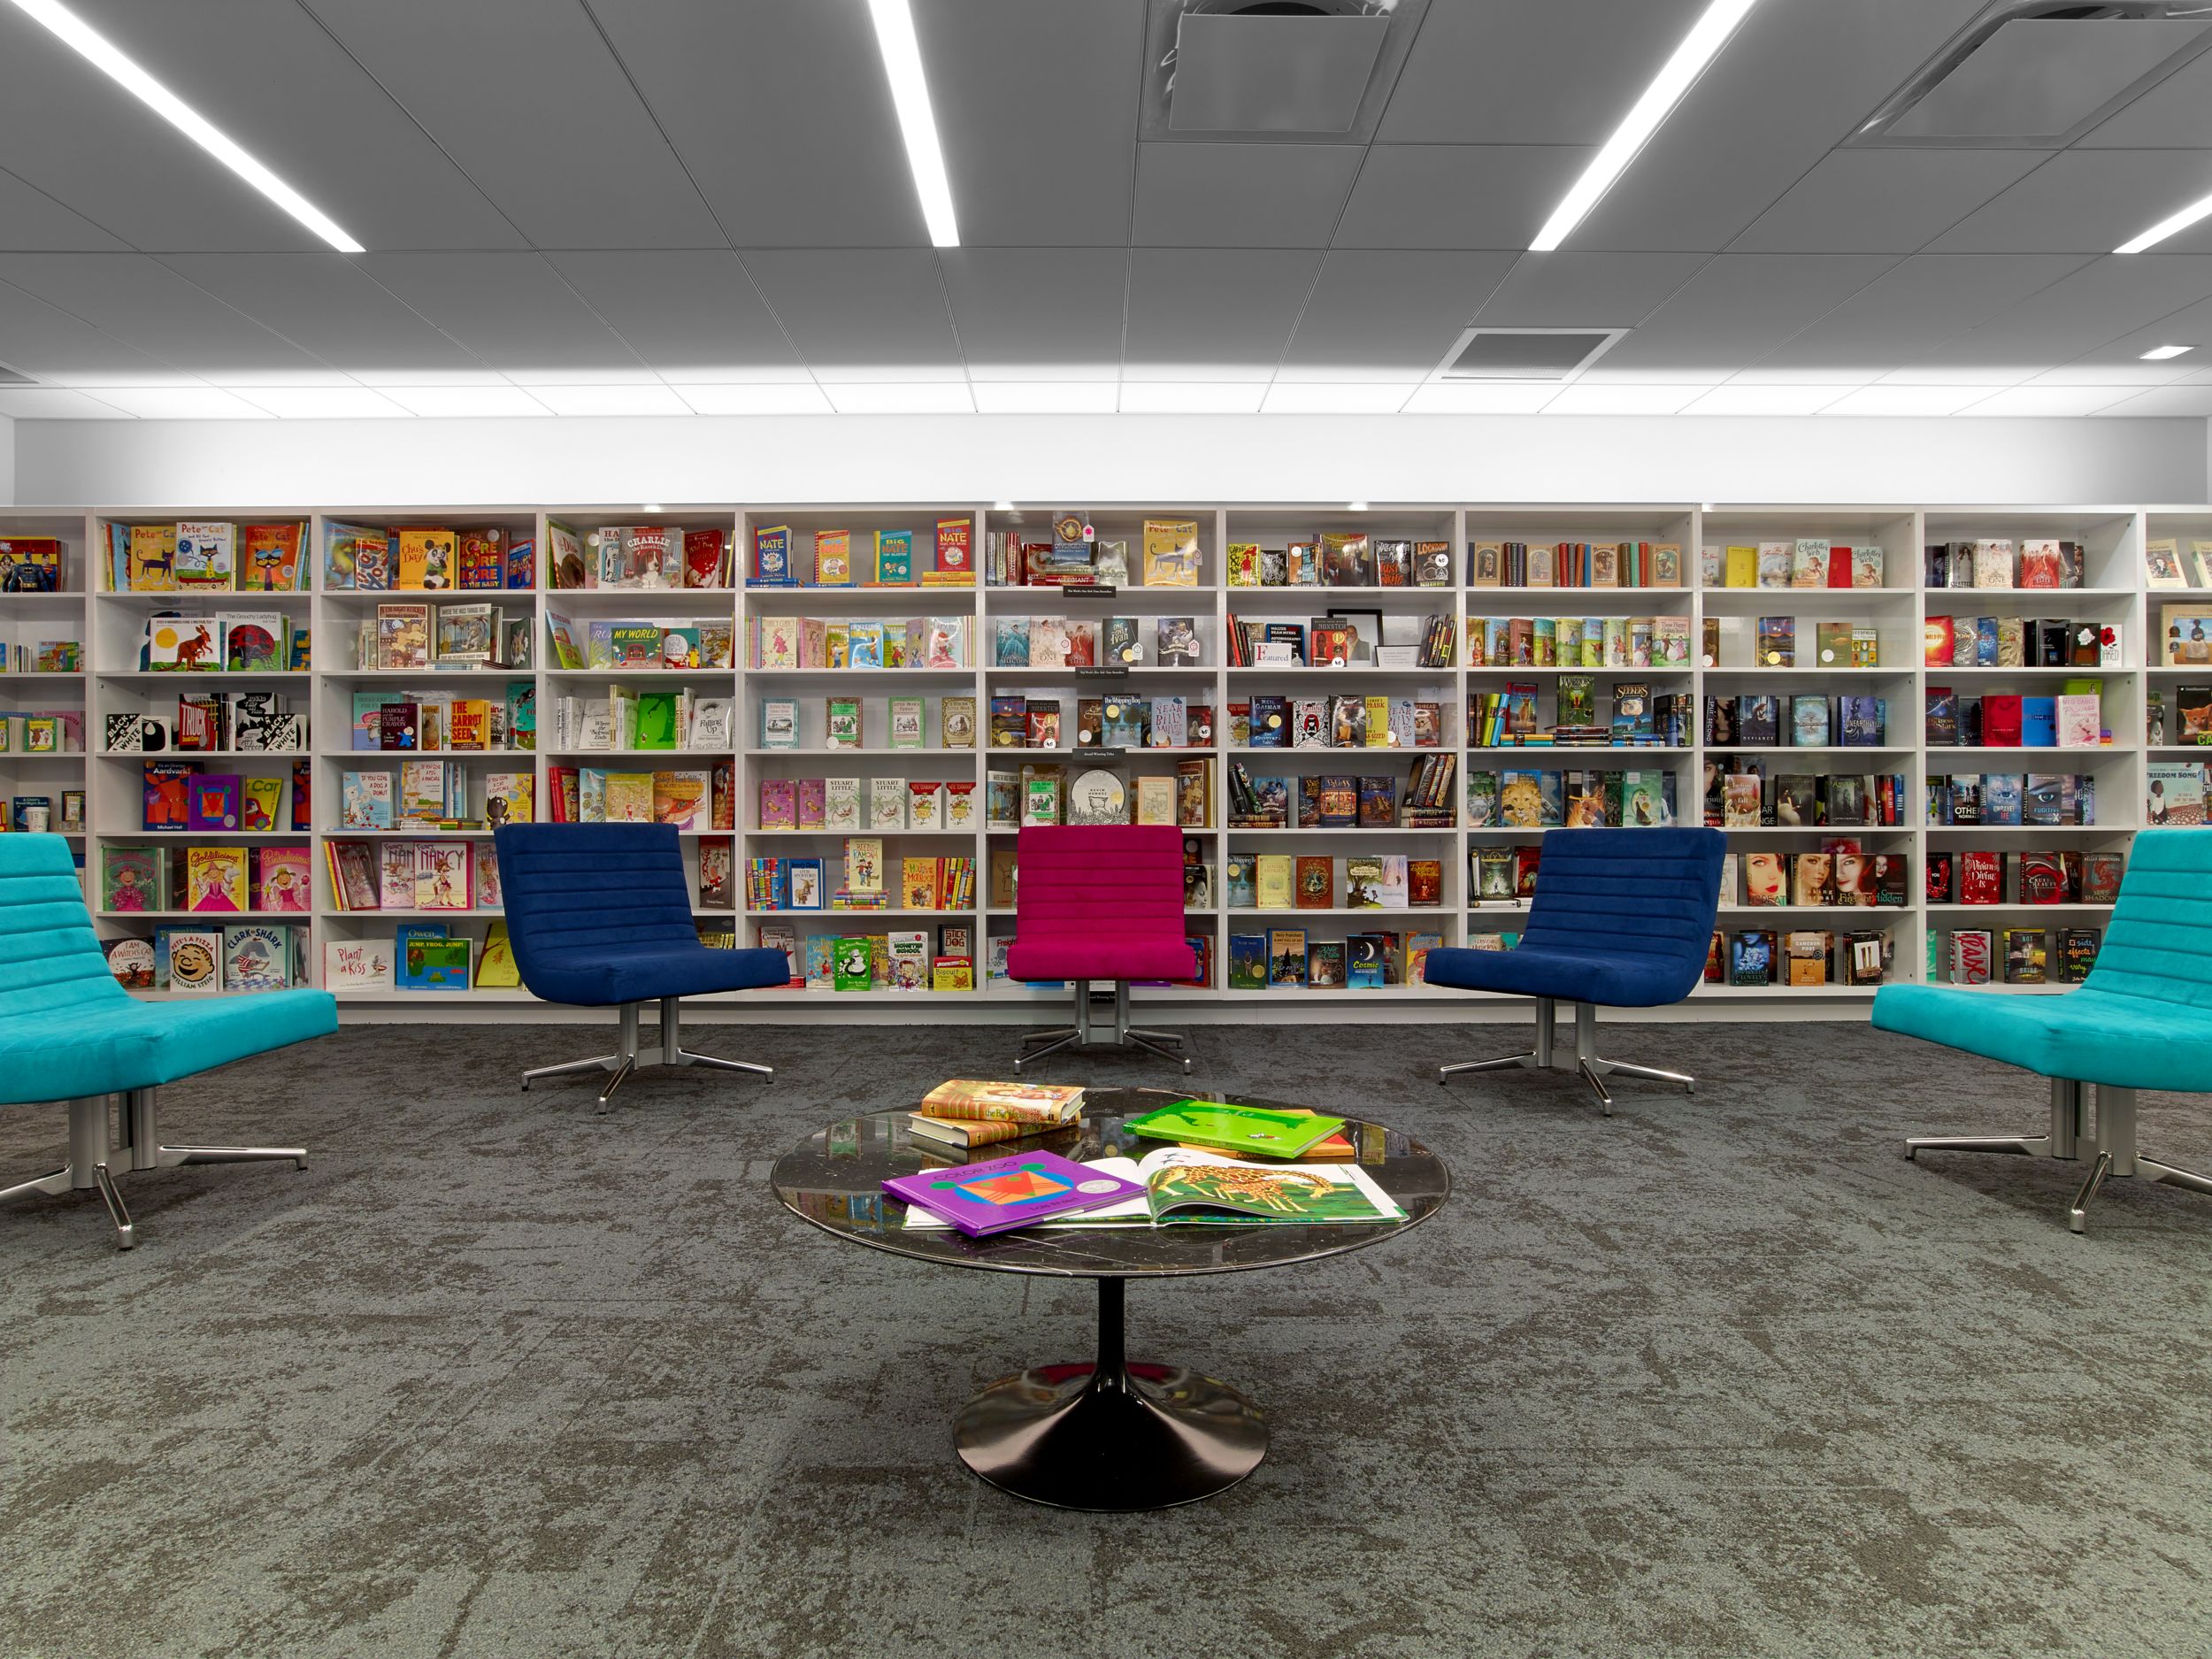 Interface B603 carpet tile in area with bookshelves and colorful chairs numéro d’image 6